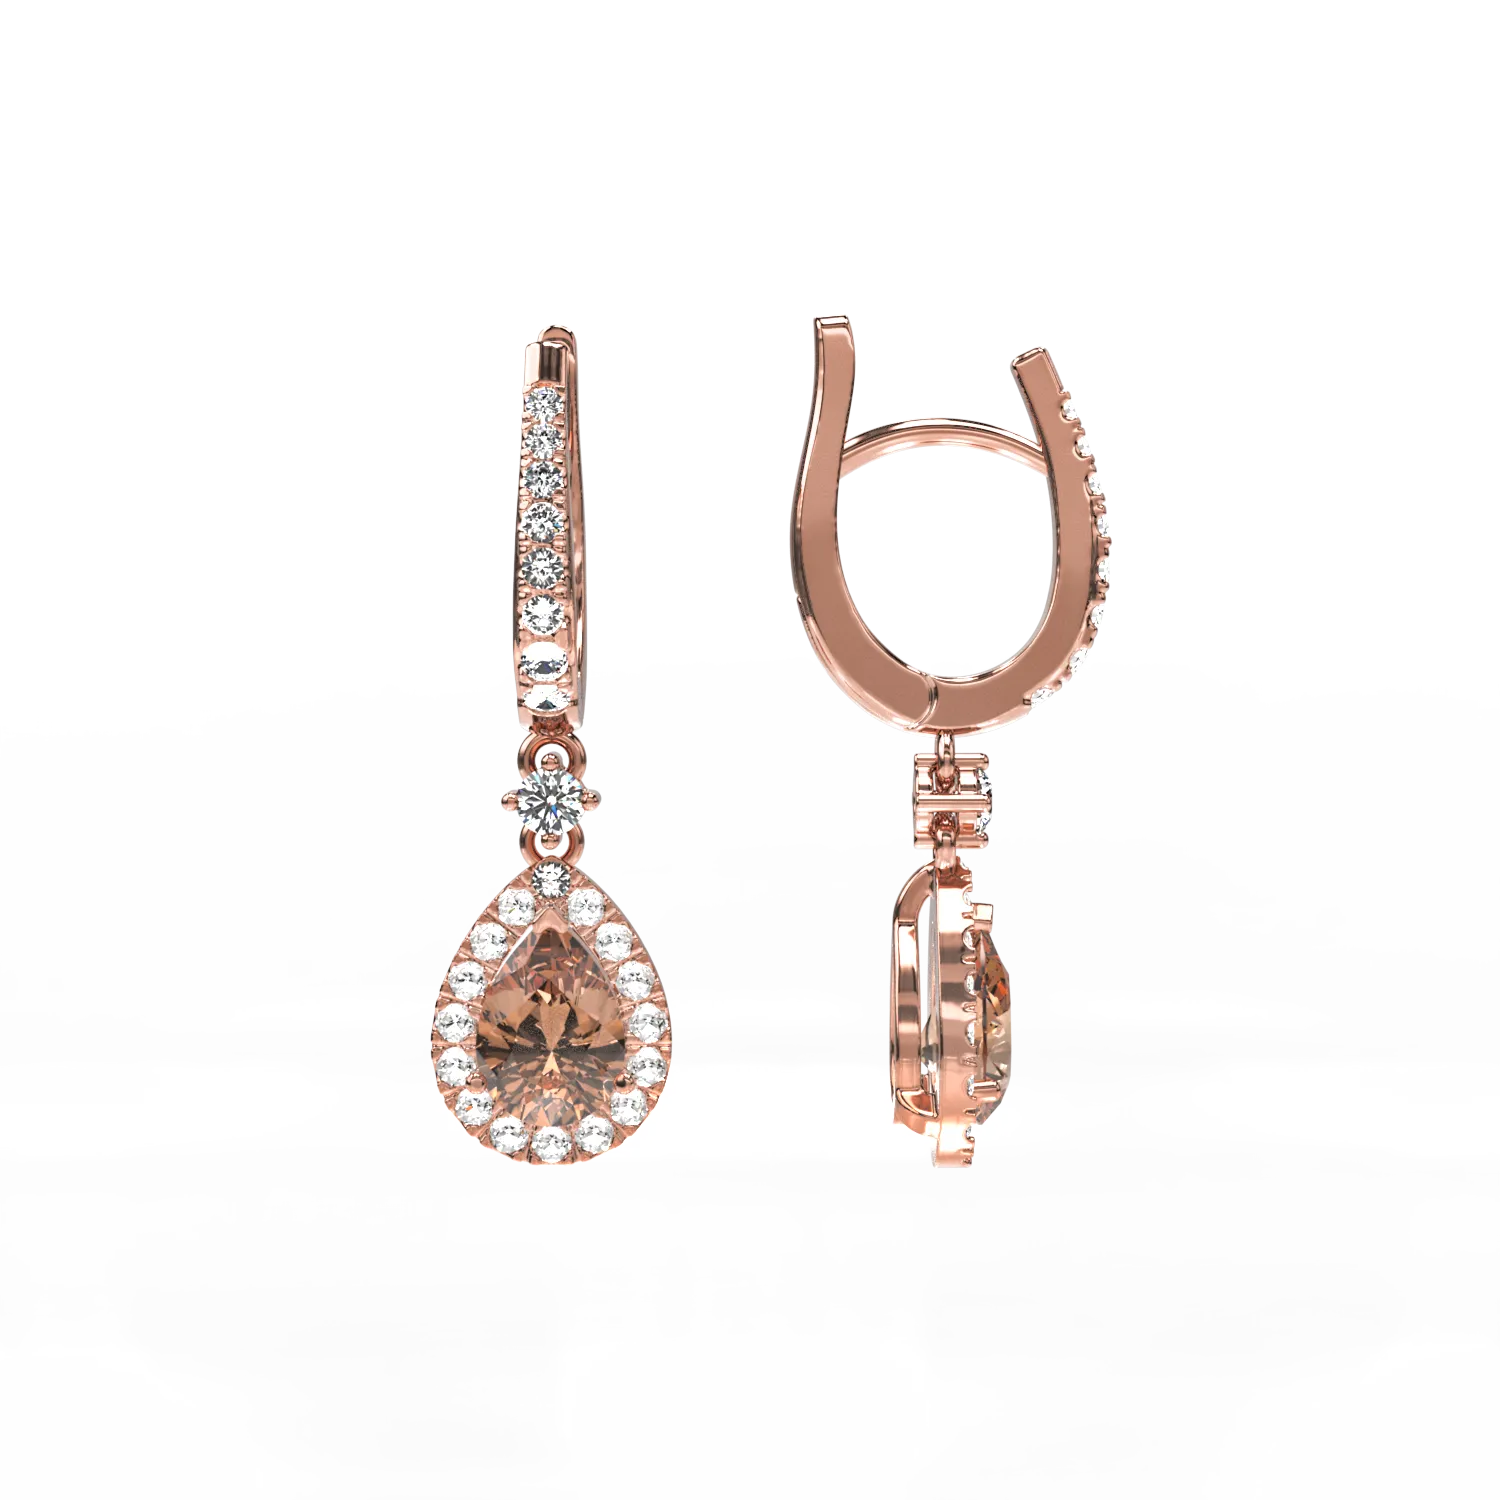 18K rose gold earrings with 1.39ct brown diamonds and 0.44ct transparent diamonds